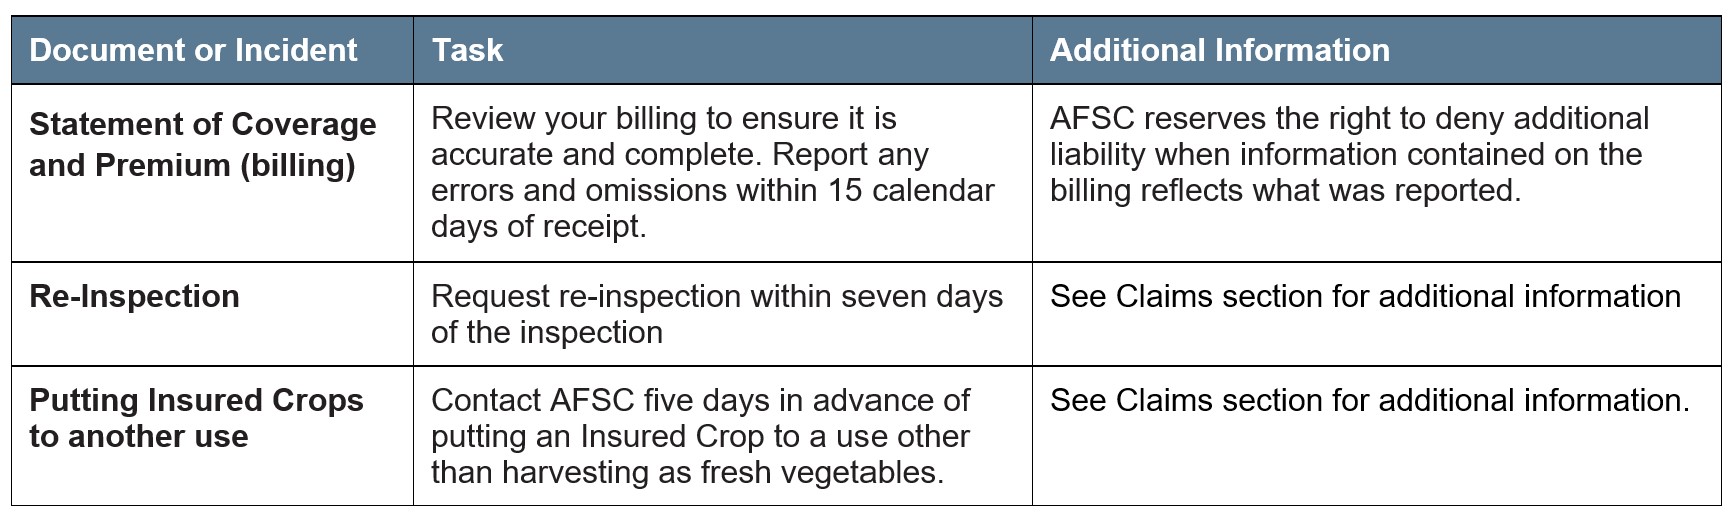 Fresh Vegetable Article 4 Other Deadlines. Call AFSC for details